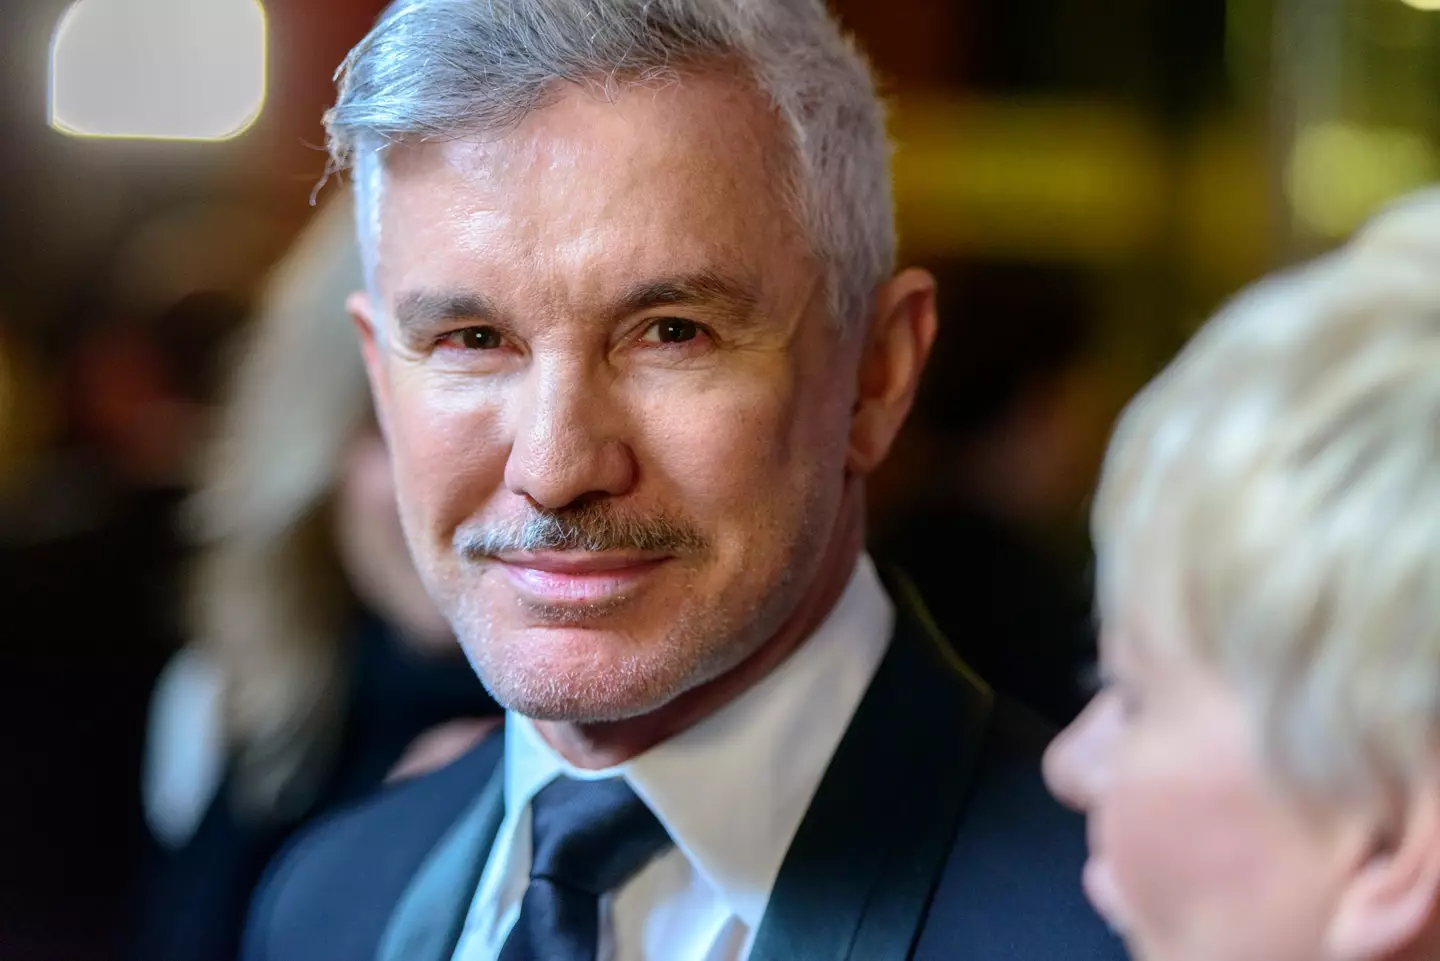 Butler explained how Luhrmann pushed him 'right to the edge' of what he was capable of as an actor.